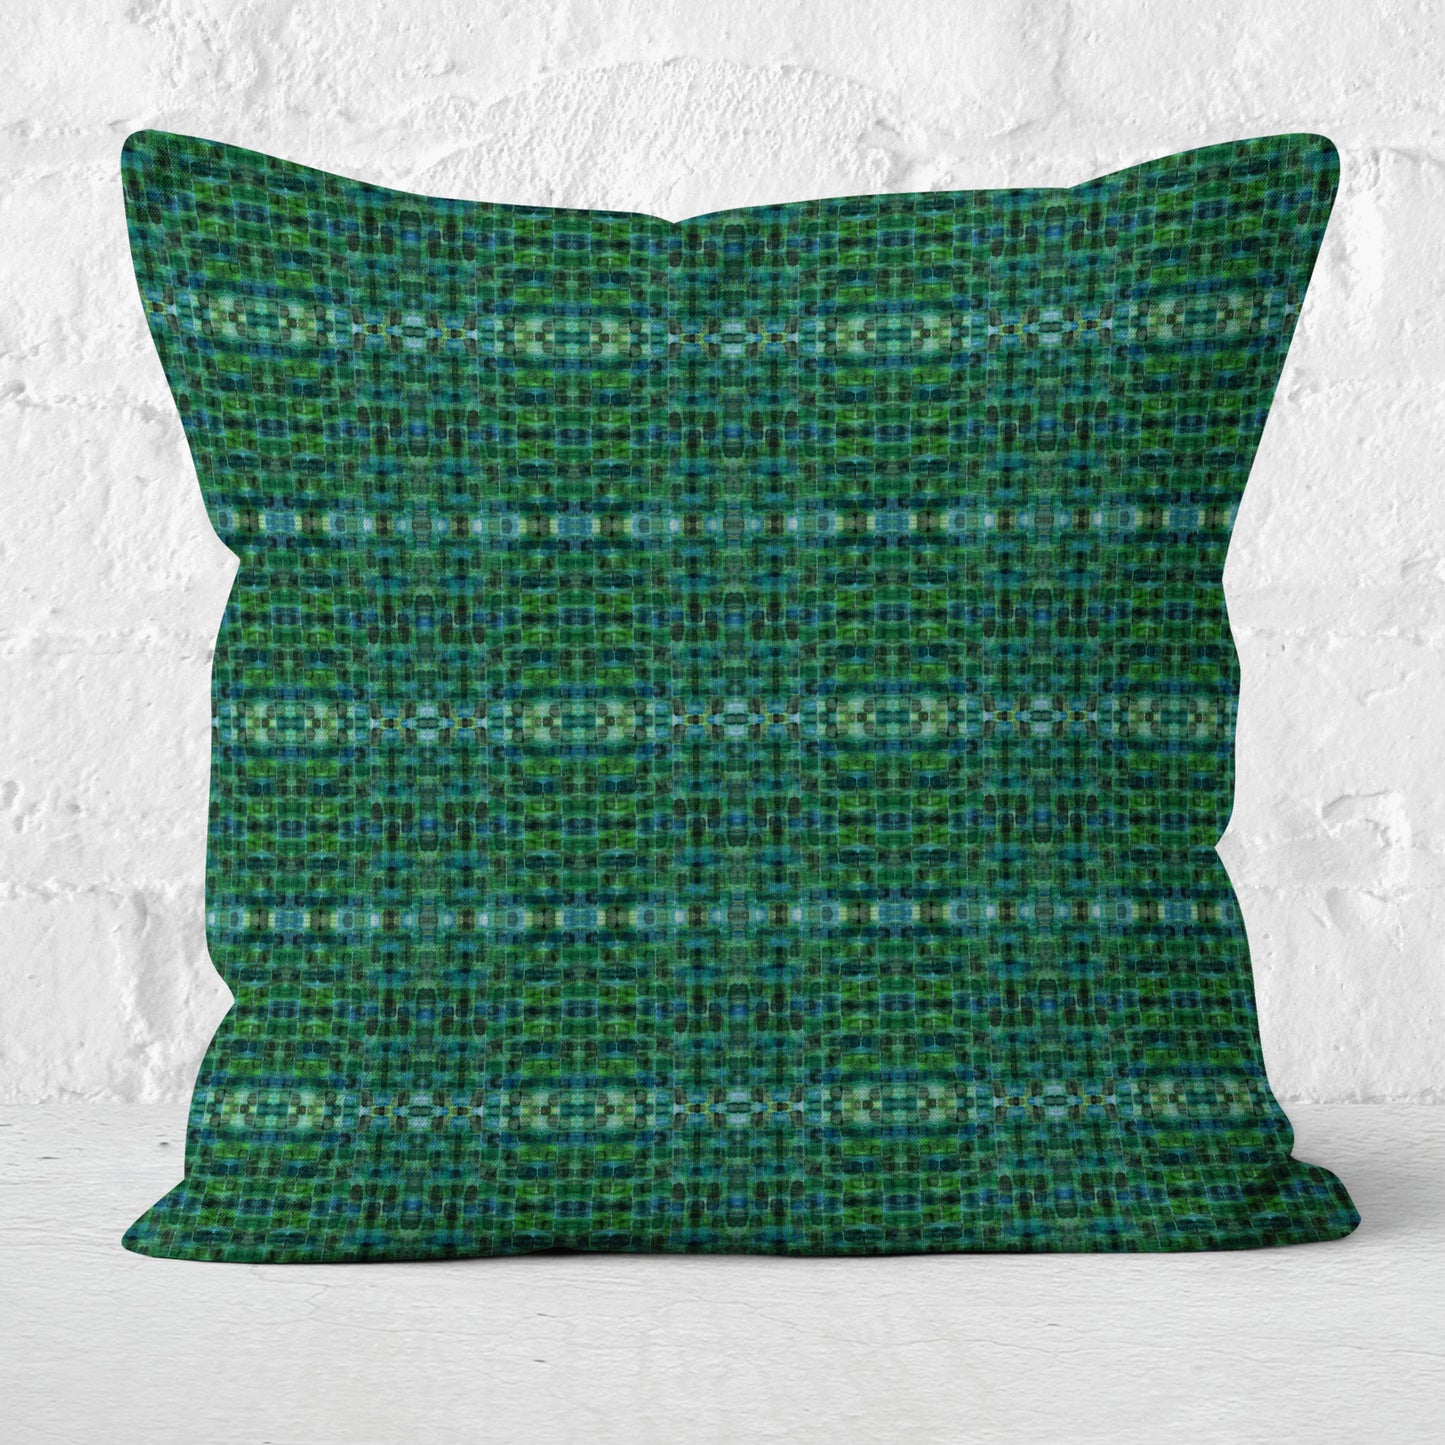 Square pillow featuring a green plaid pattern sitting in front of a white brick wall